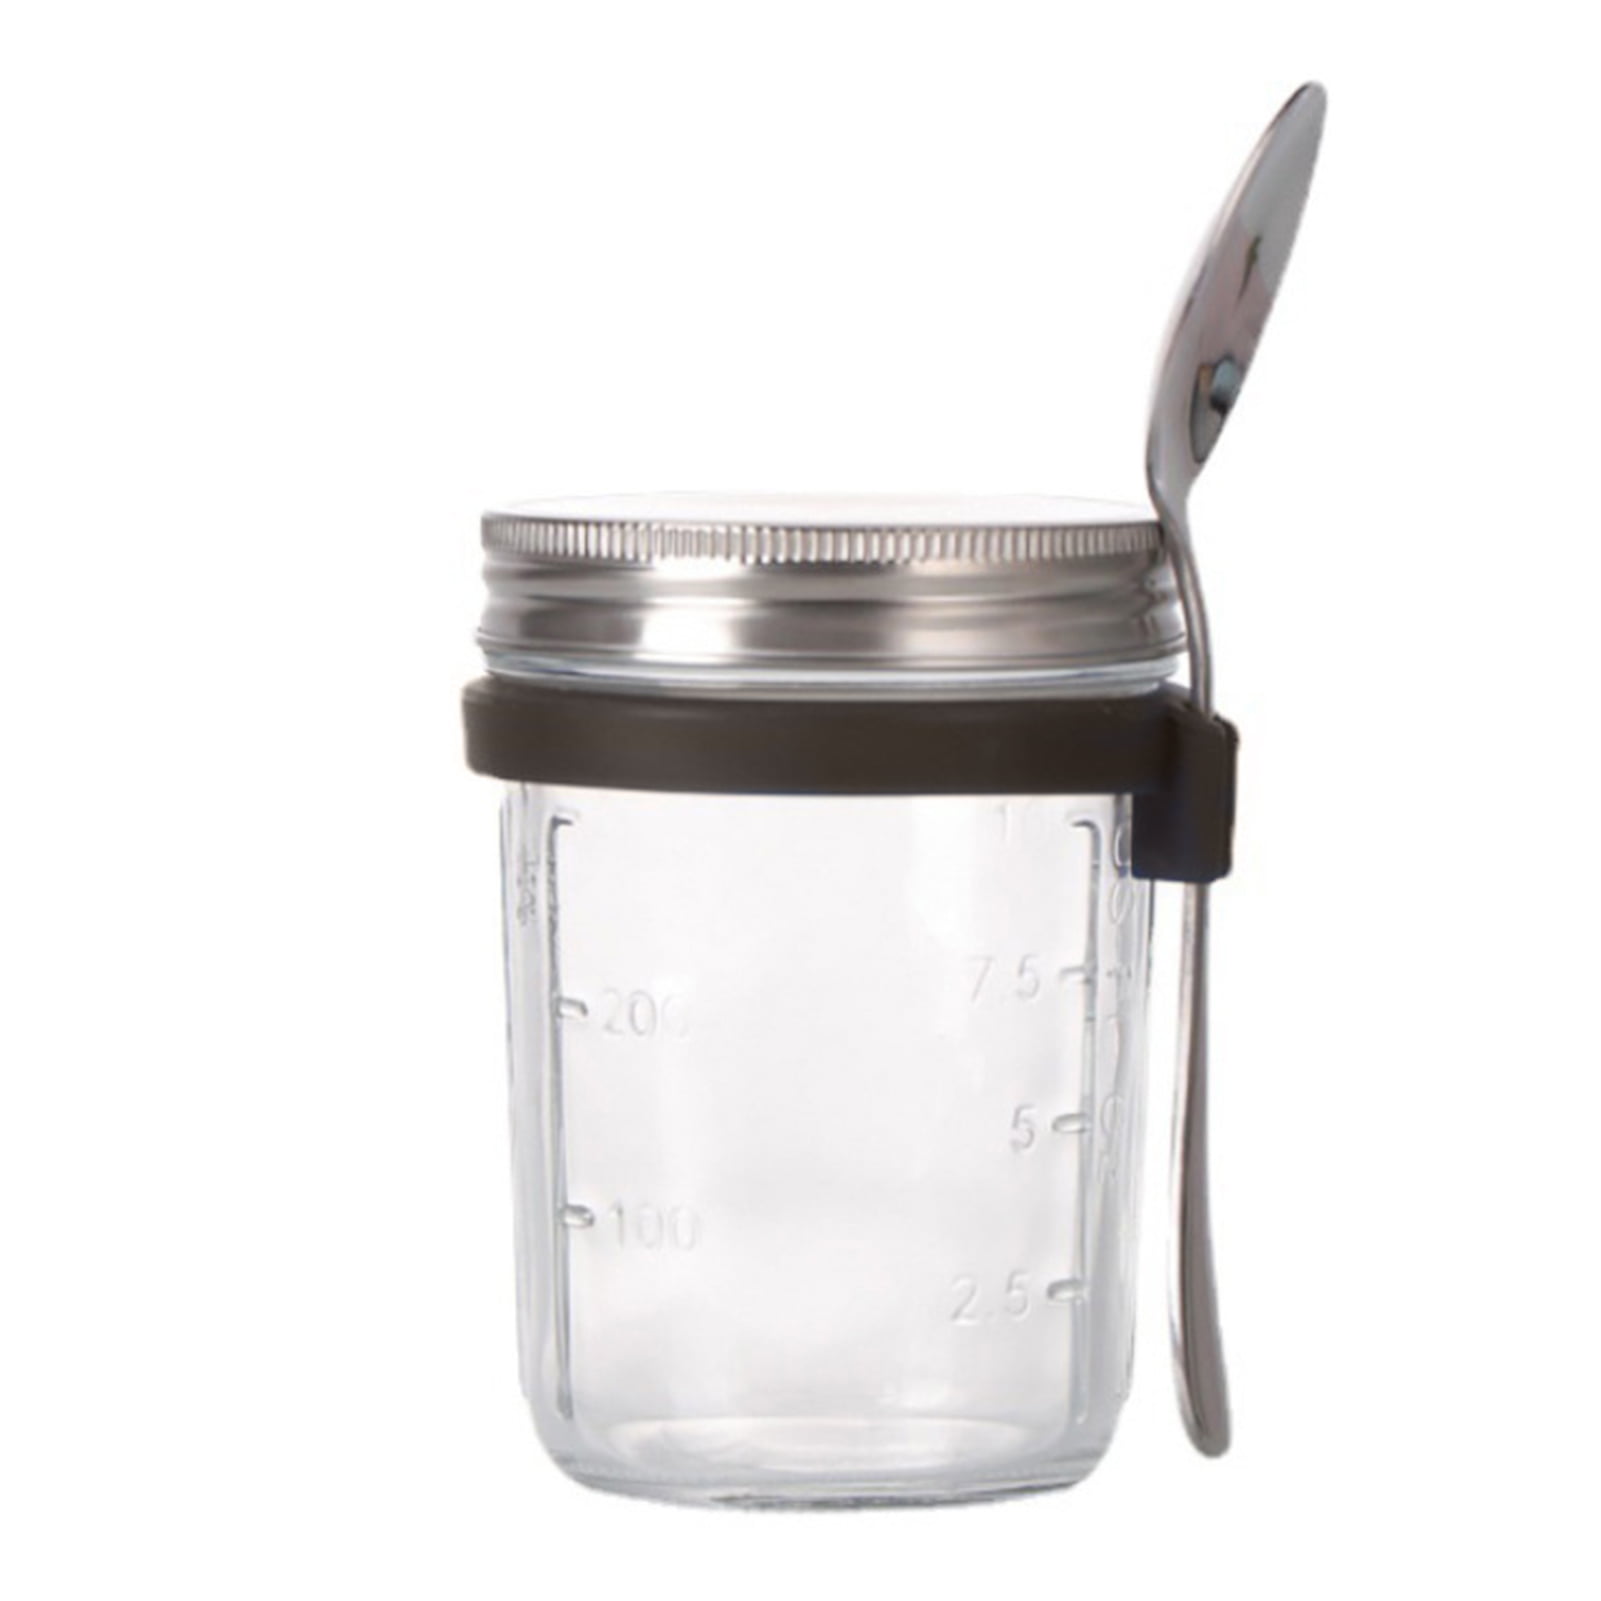 Microplane 3pc Jar Top Set: Master Meal Prep with Wide-Mouth Mason